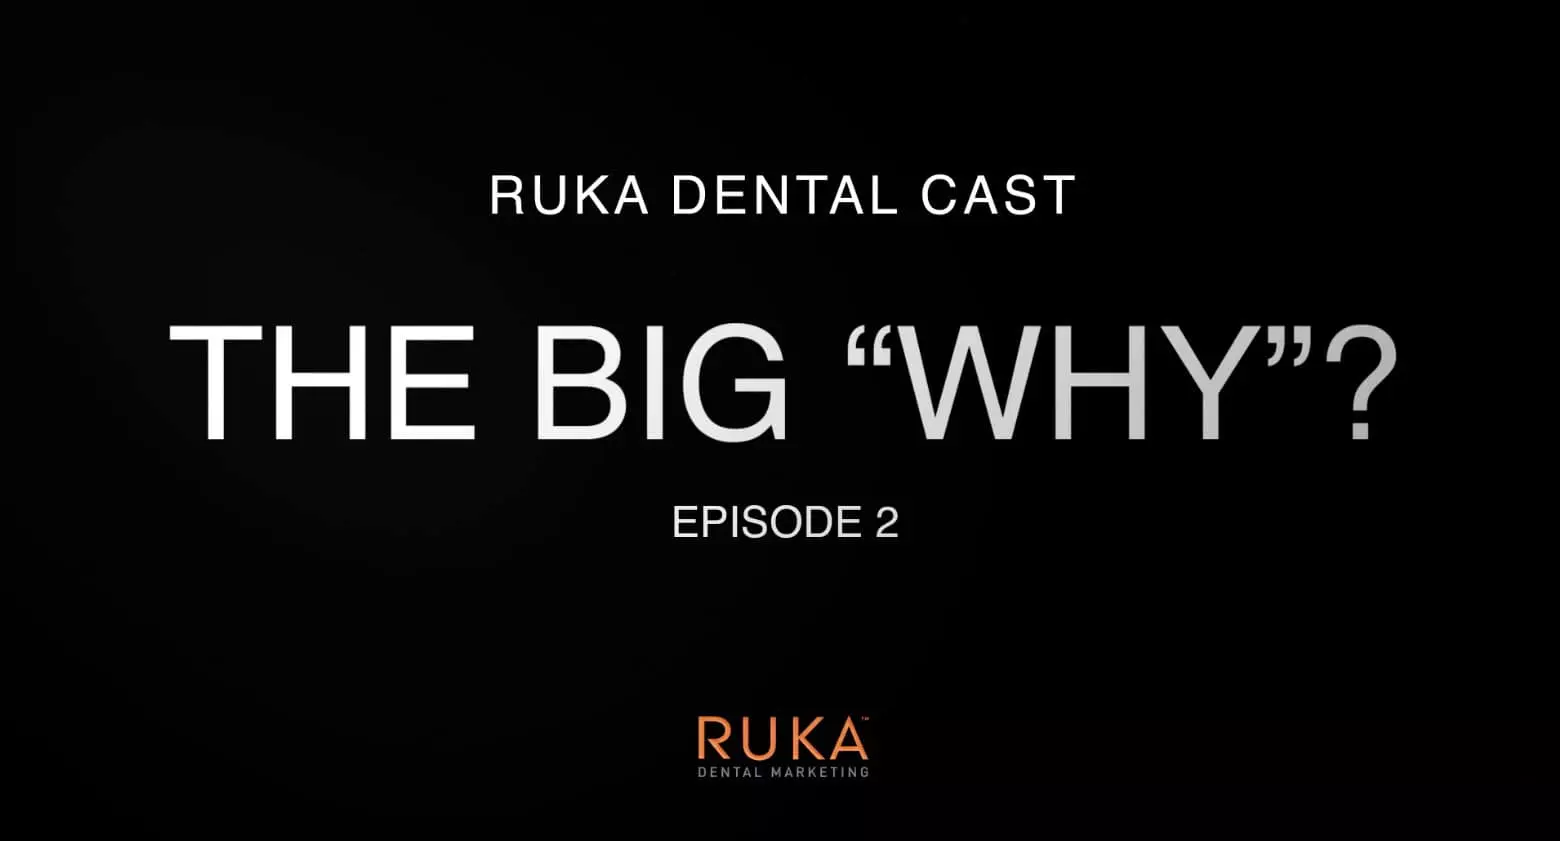 Ruka dental discusses why patients choose your practice in episode 2.